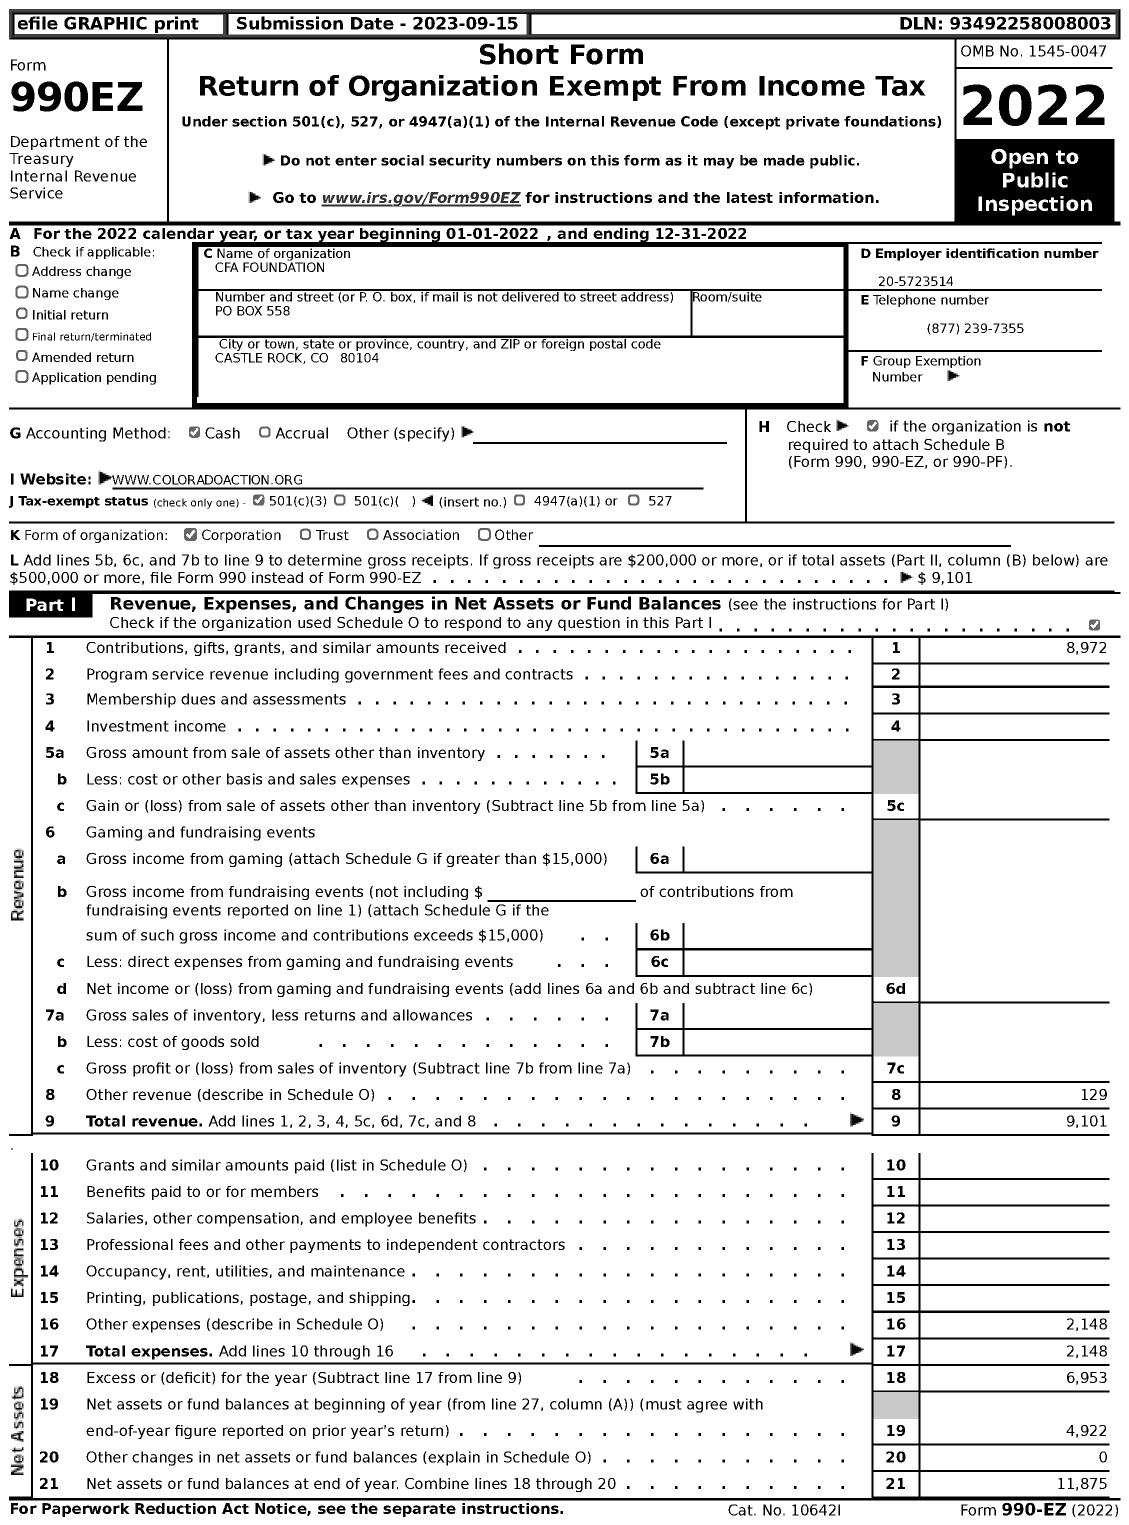 Image of first page of 2022 Form 990EZ for Cfa Foundation